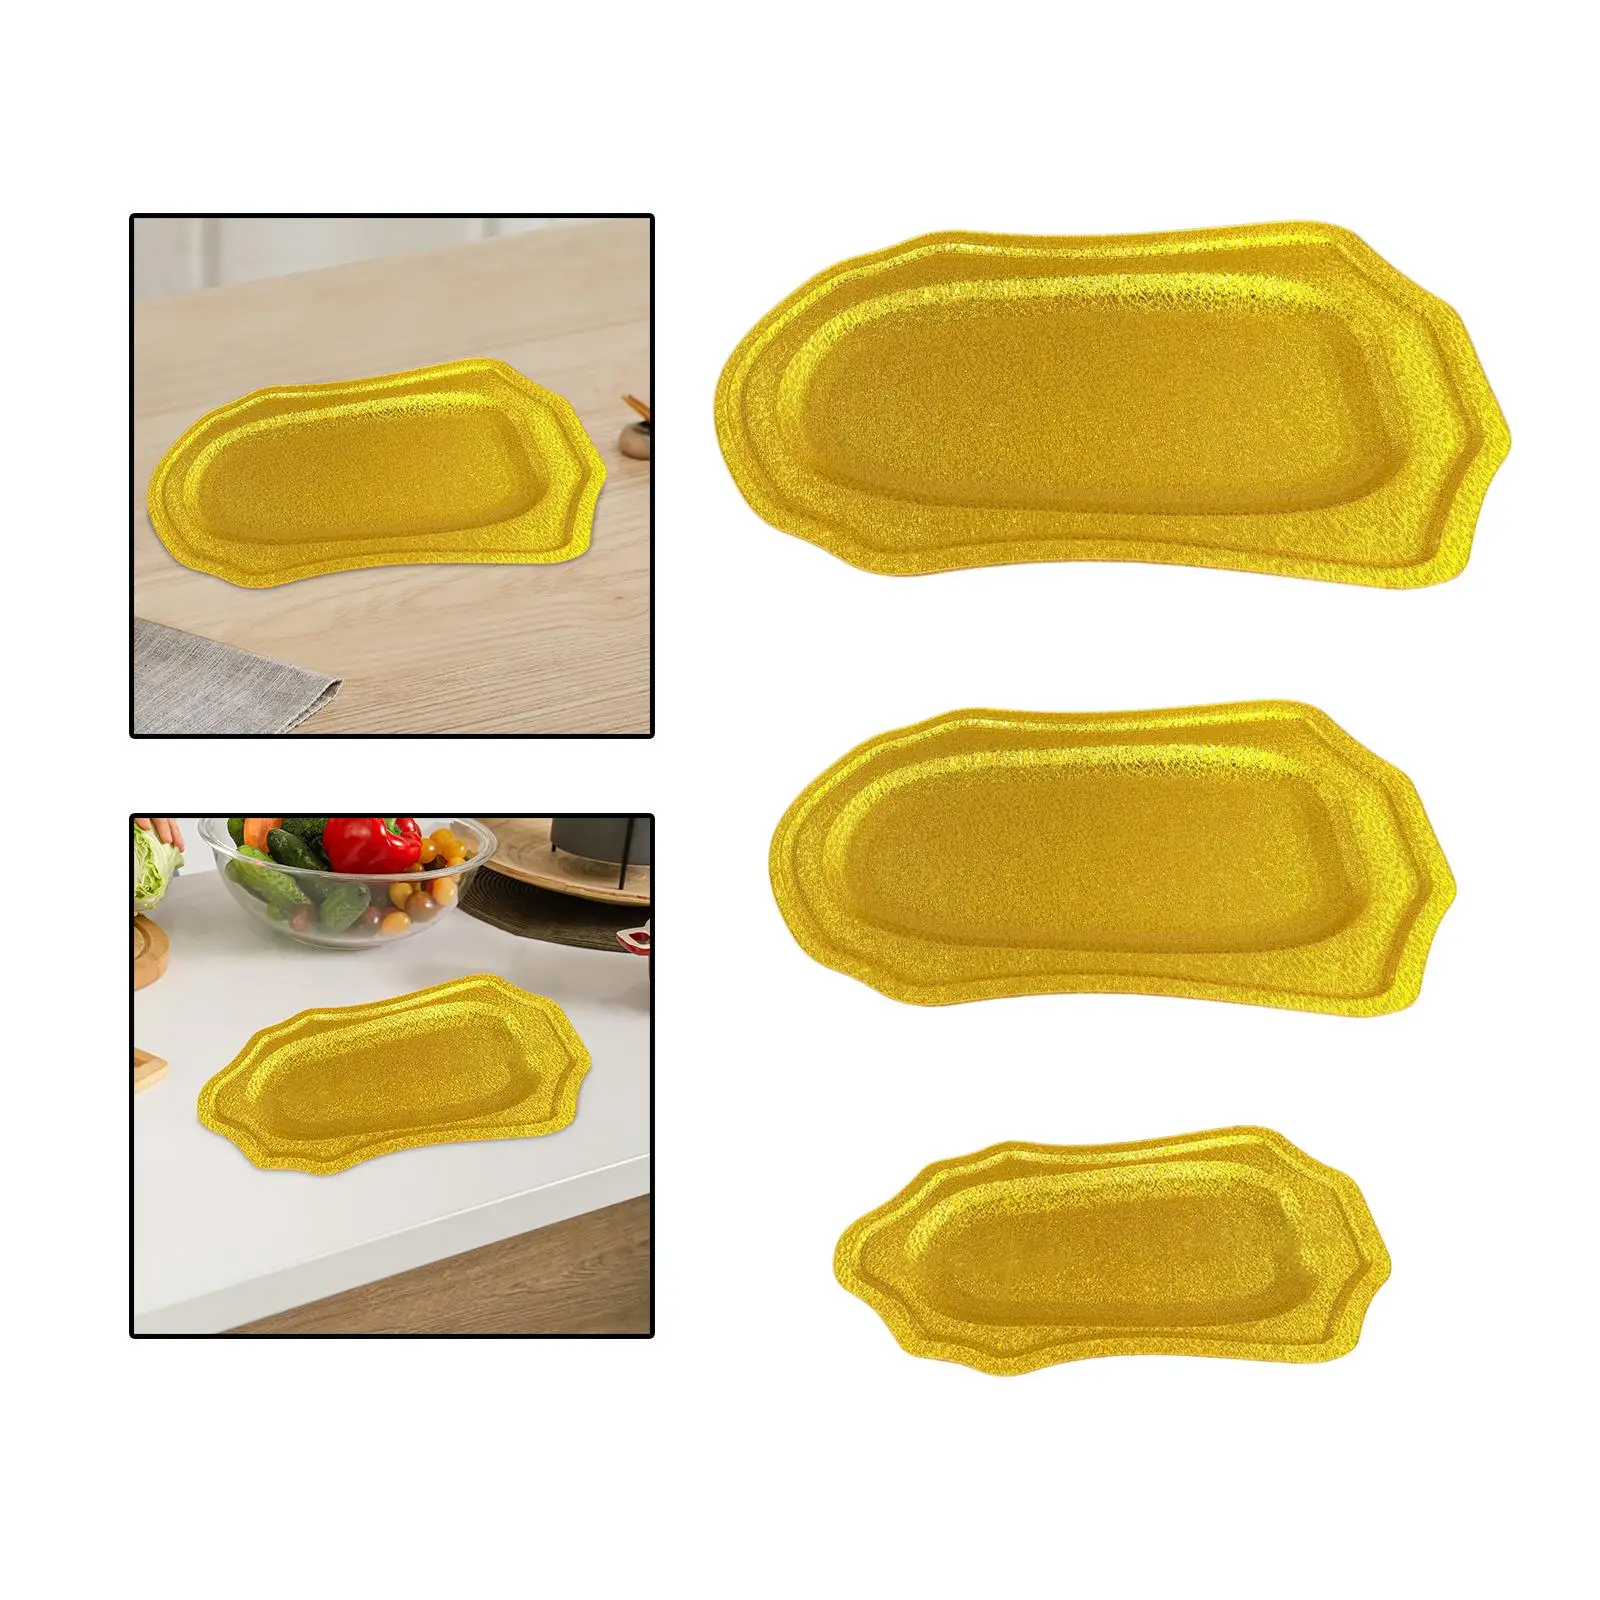 Food Serving Plate Reusable Kitchen Dinnerware Acrylic Plate Serving Tray Dessert Tray for Snack Fruit Appetizer Baking Wedding